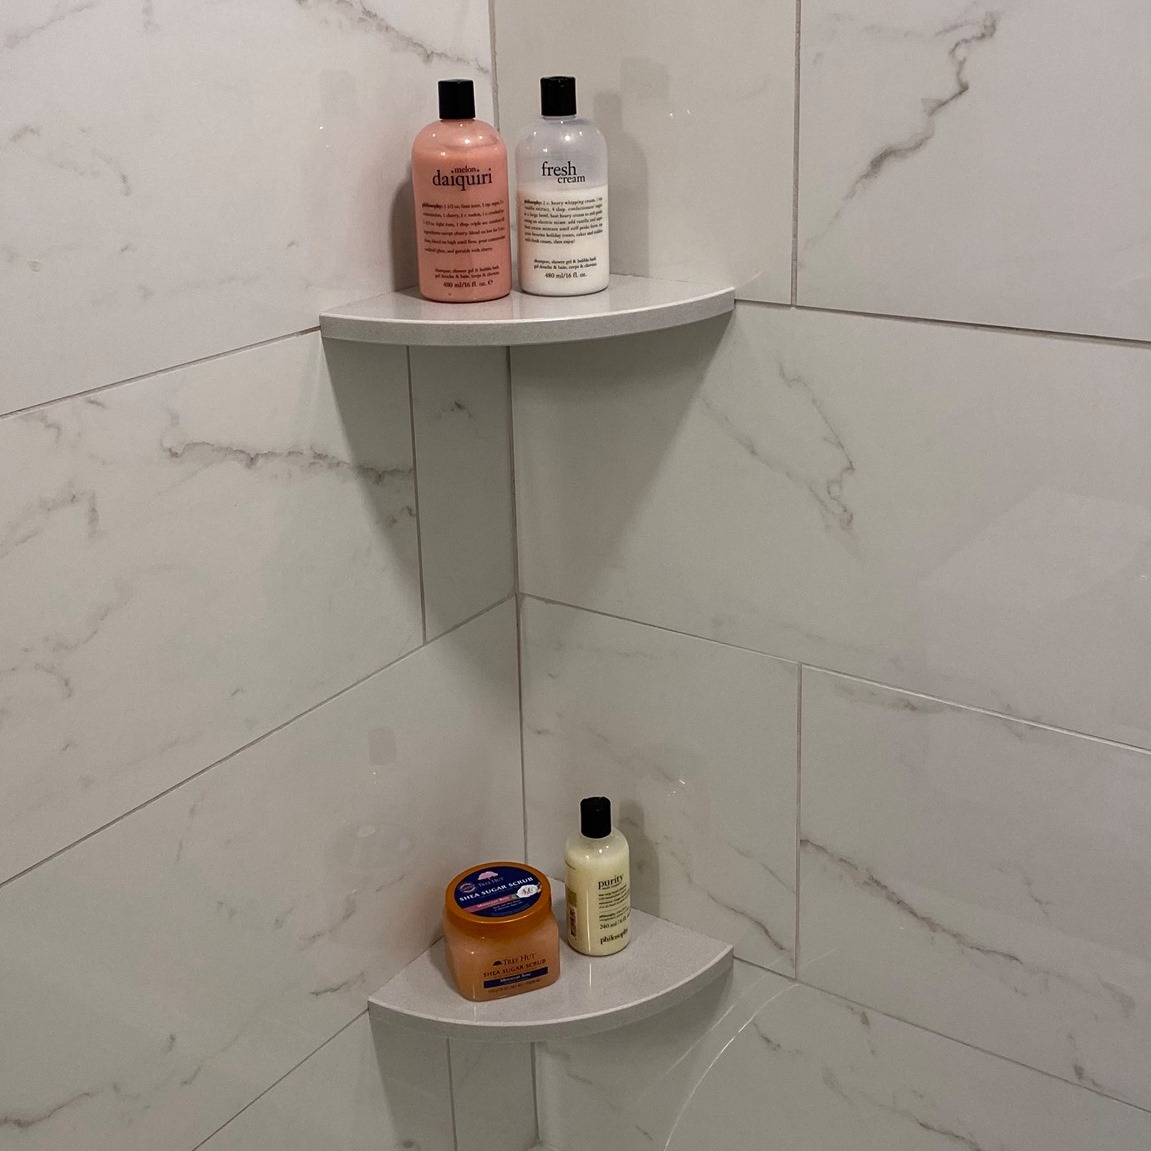 How to Install Floating Shelves on Tile Wall with GoShelf